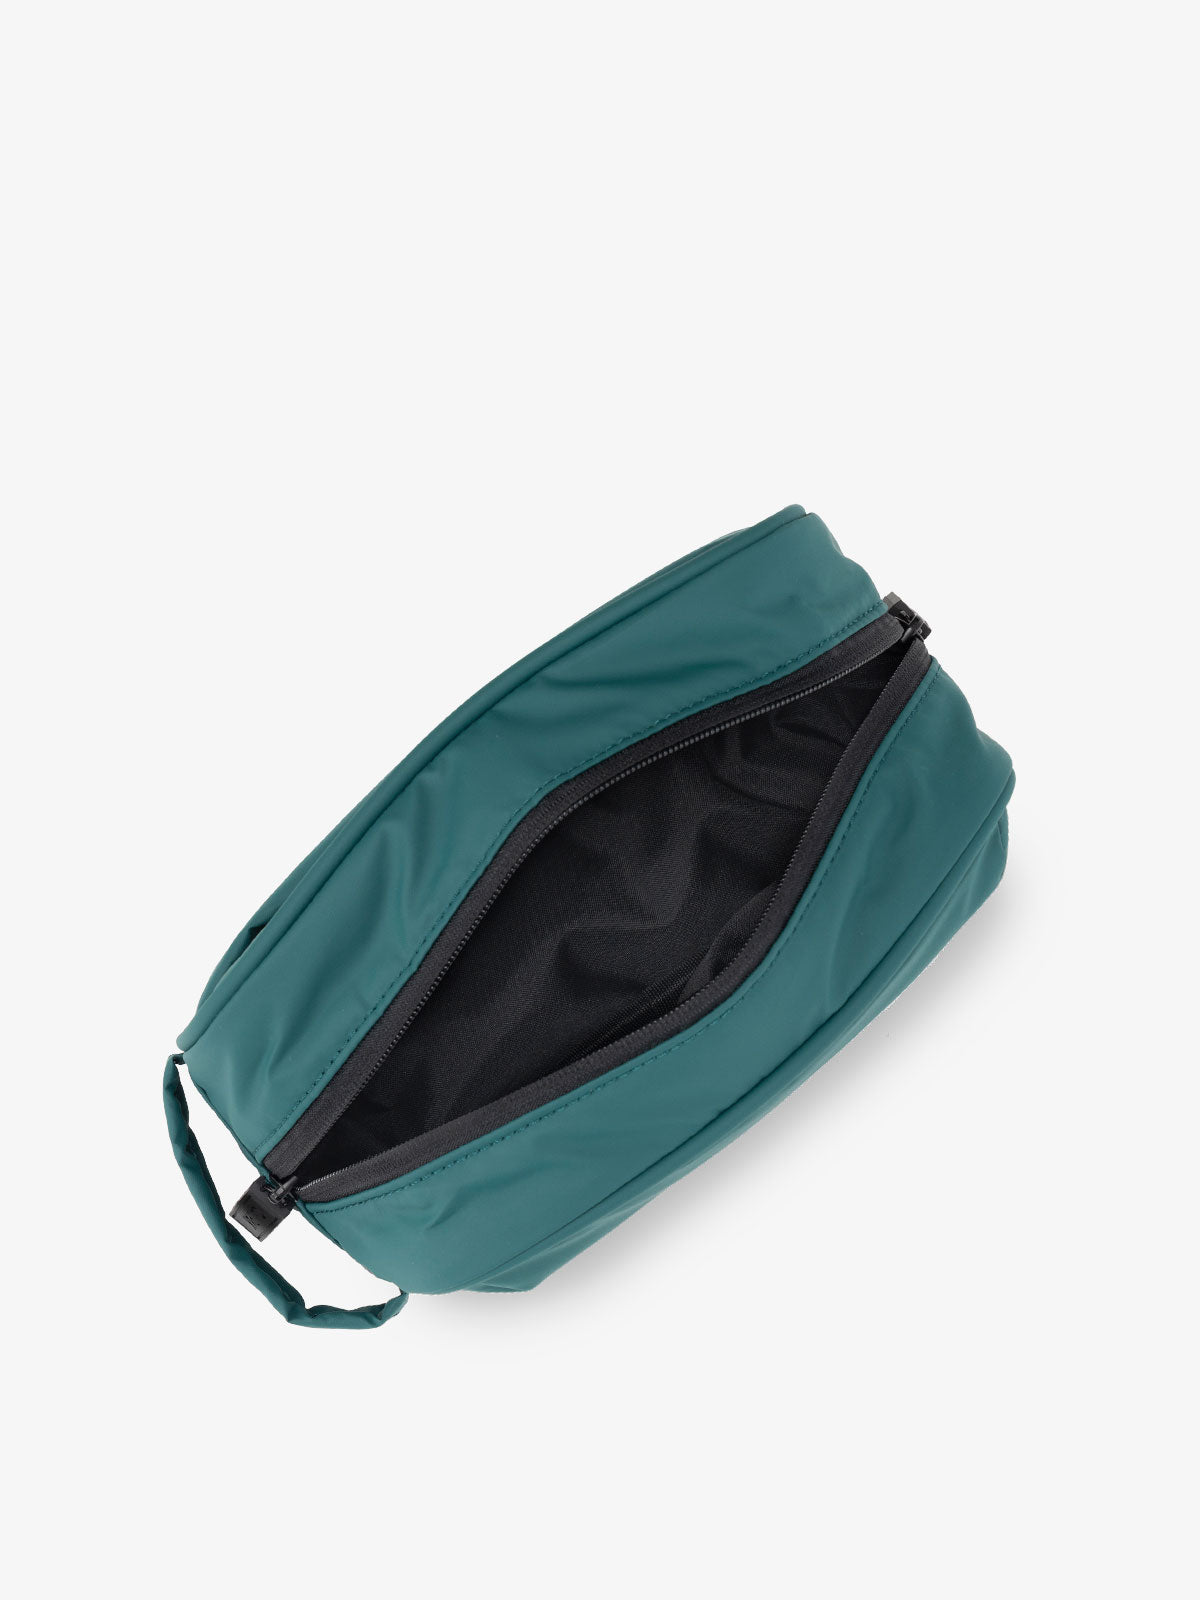 top of travel toiletry bag in kale green